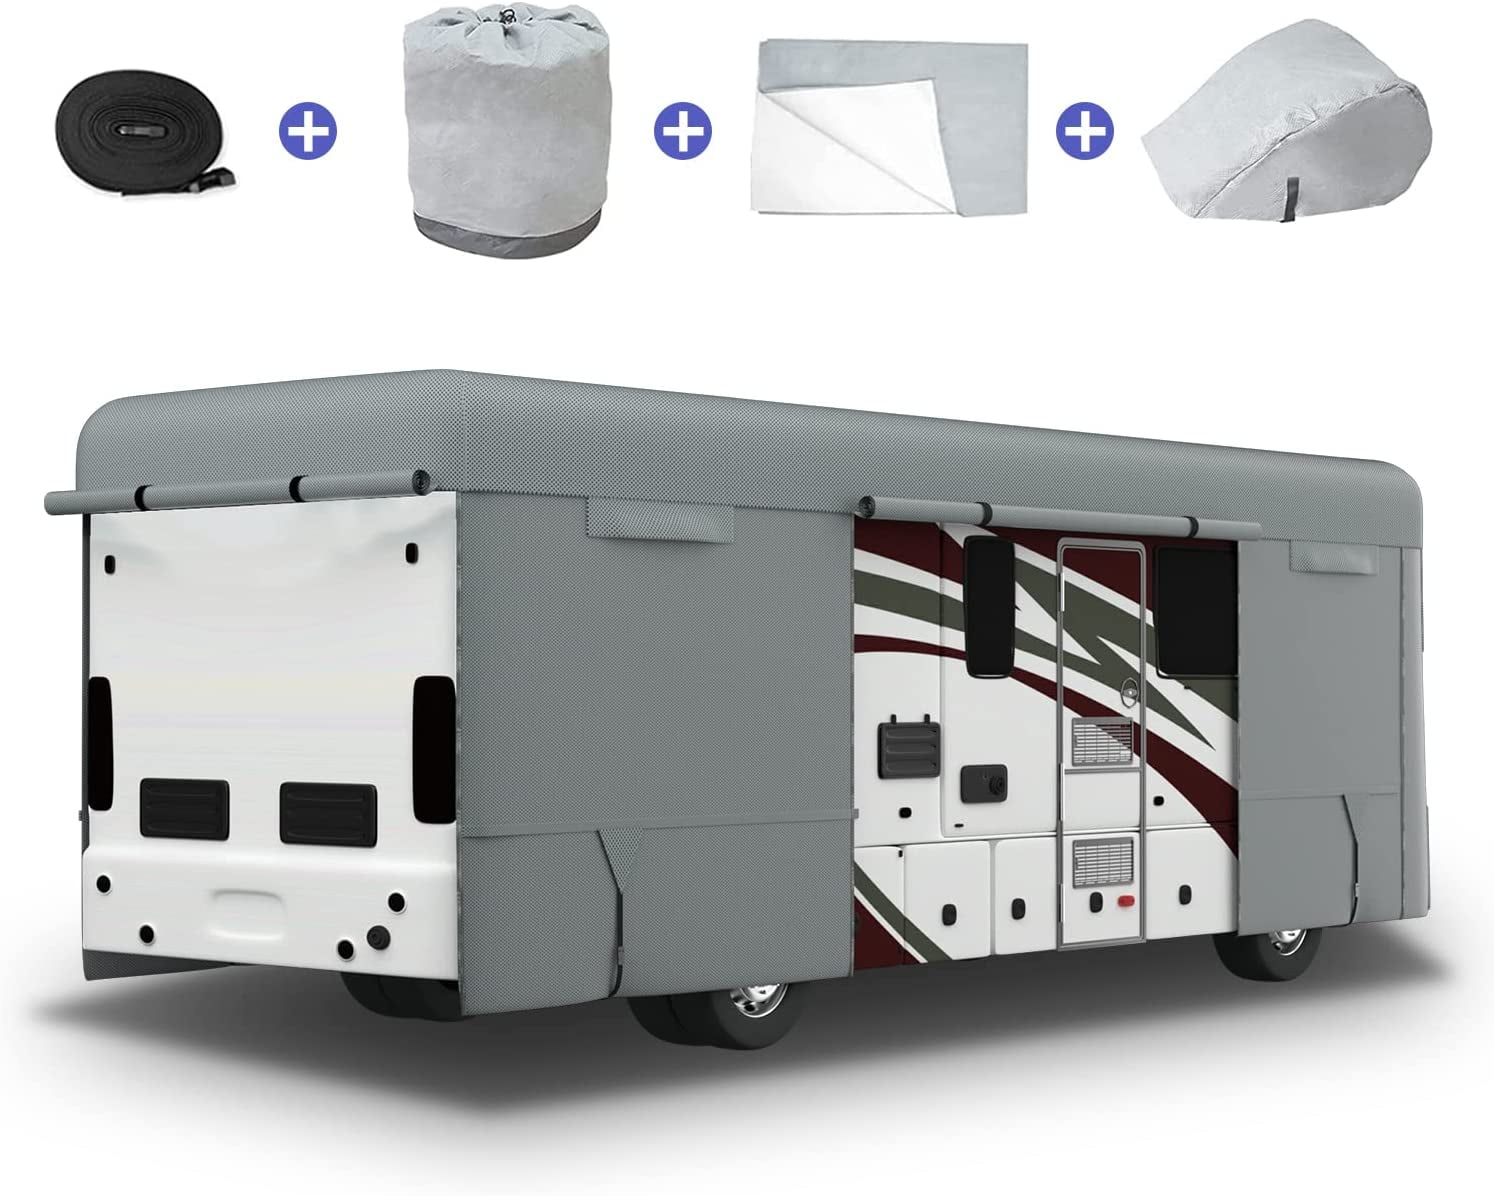 DikaSun Class A RV Camper Cover 34'-37' 3 Layers Poly-pro Breathable Waterproof Rip-Stop Anti-UV RV Motor-Home Cover with Adhesive Repair Patches Storage Bag 